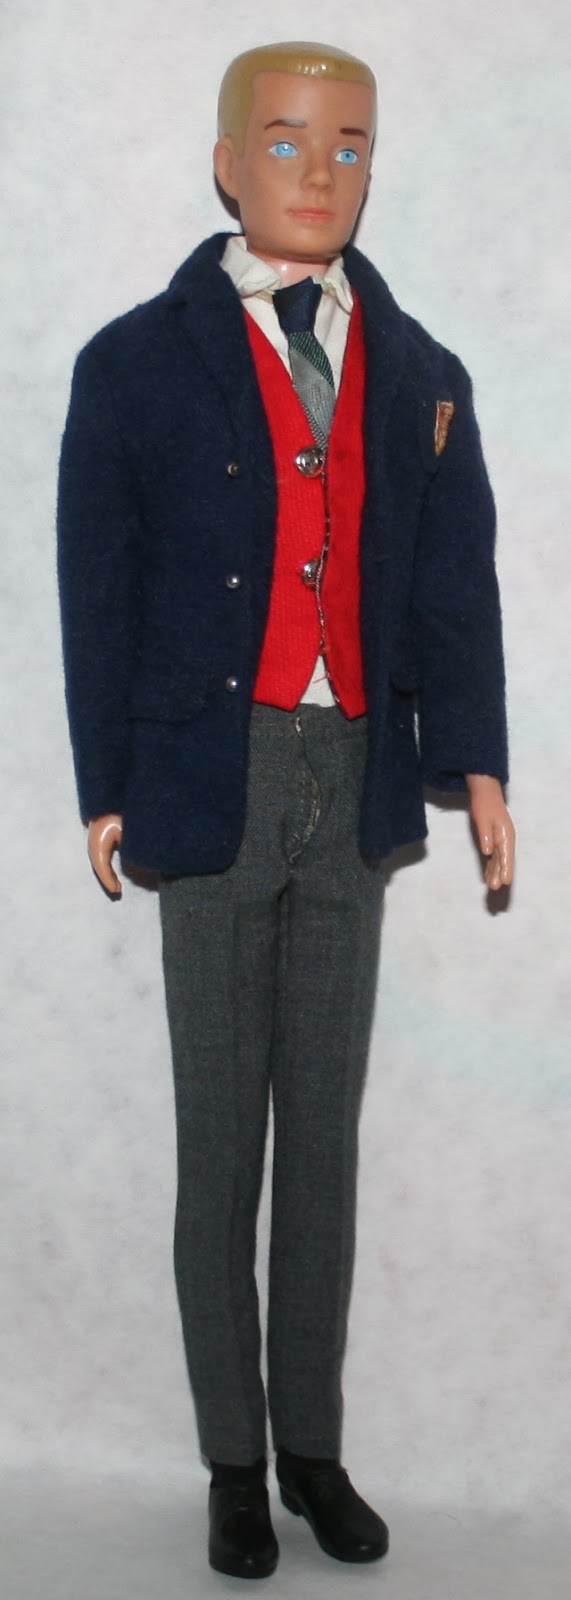 PLANET OF THE DOLLS: Doll-A-Day 45: Straight Leg Ken (Shortie)